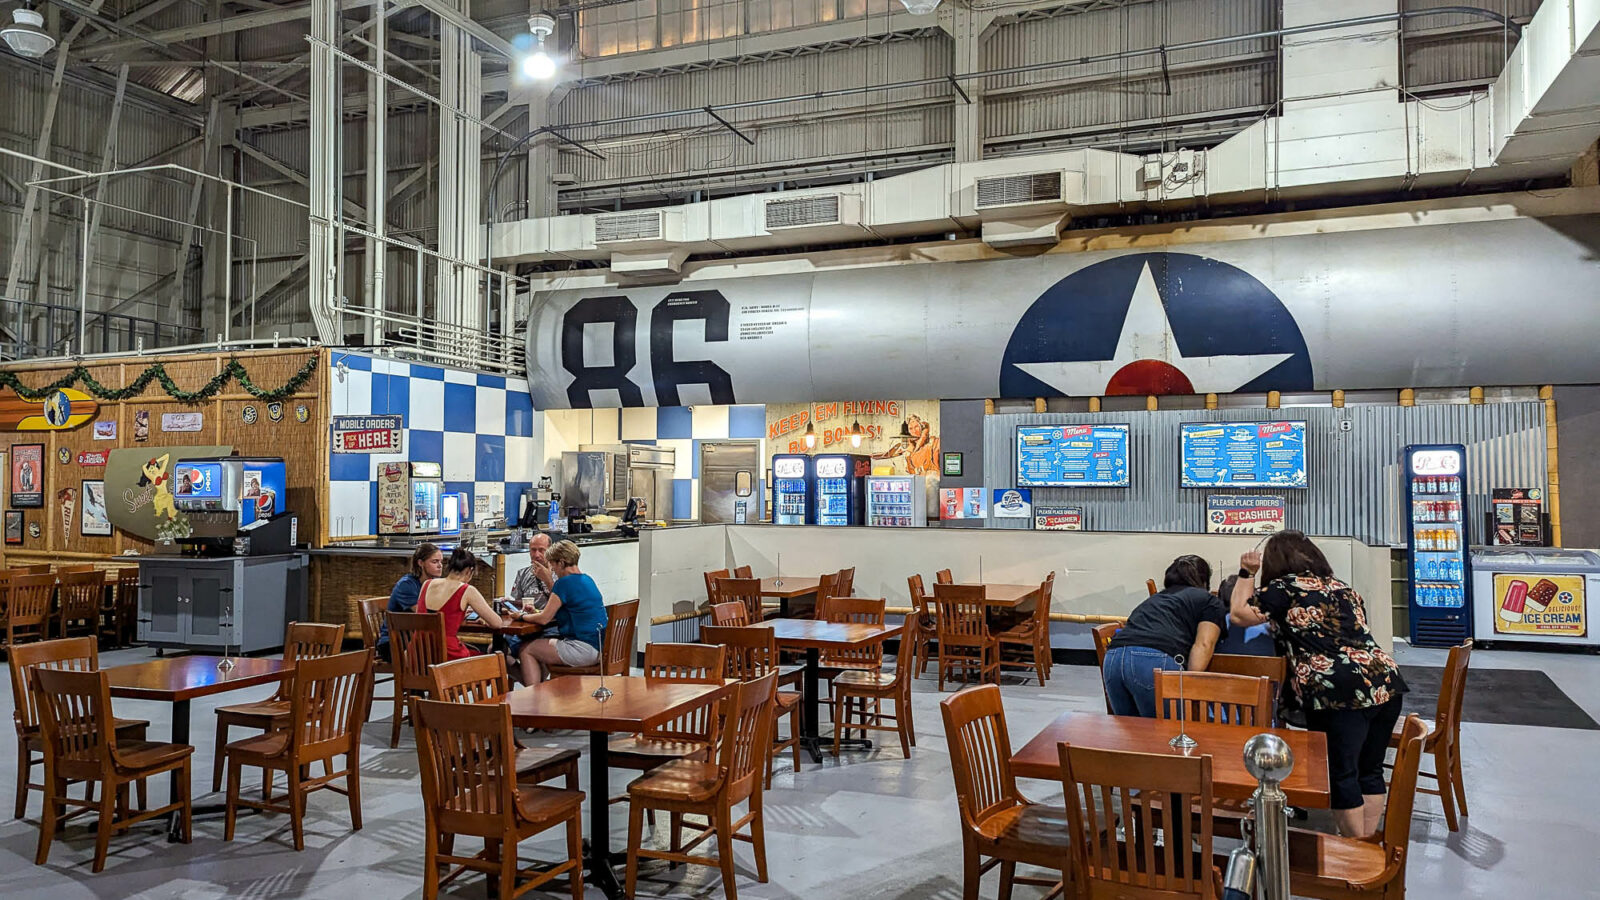 people sitting at brown tables inside an airplane hangar